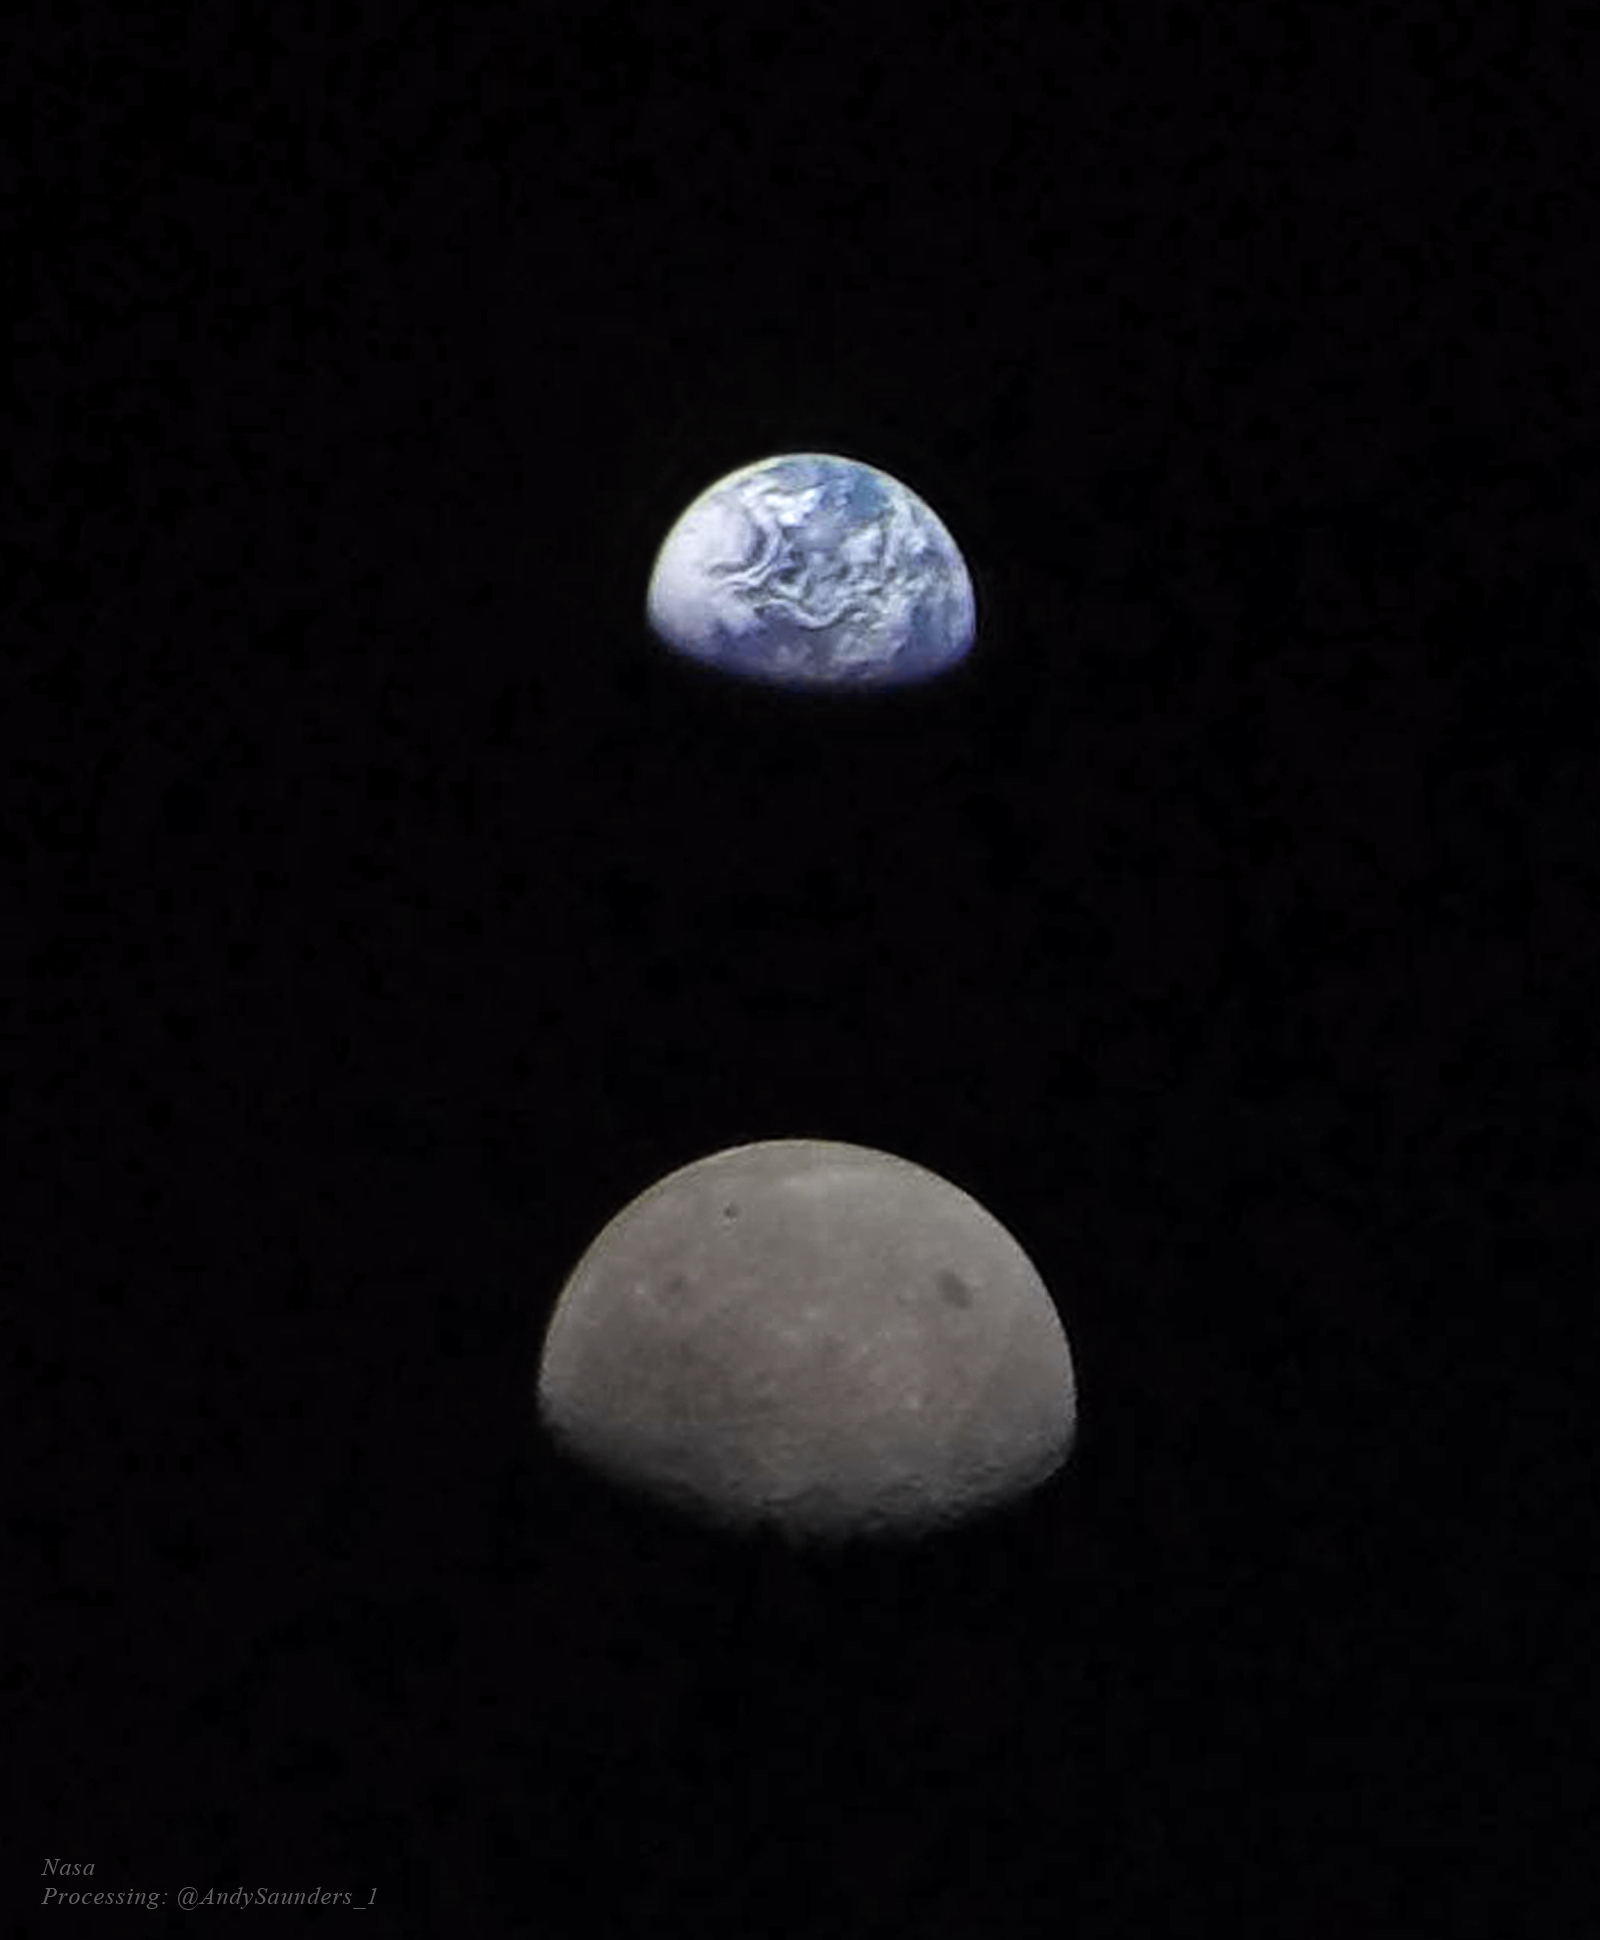 Earth and Moon photographed during the Artemis I uncrewed mission in 2022